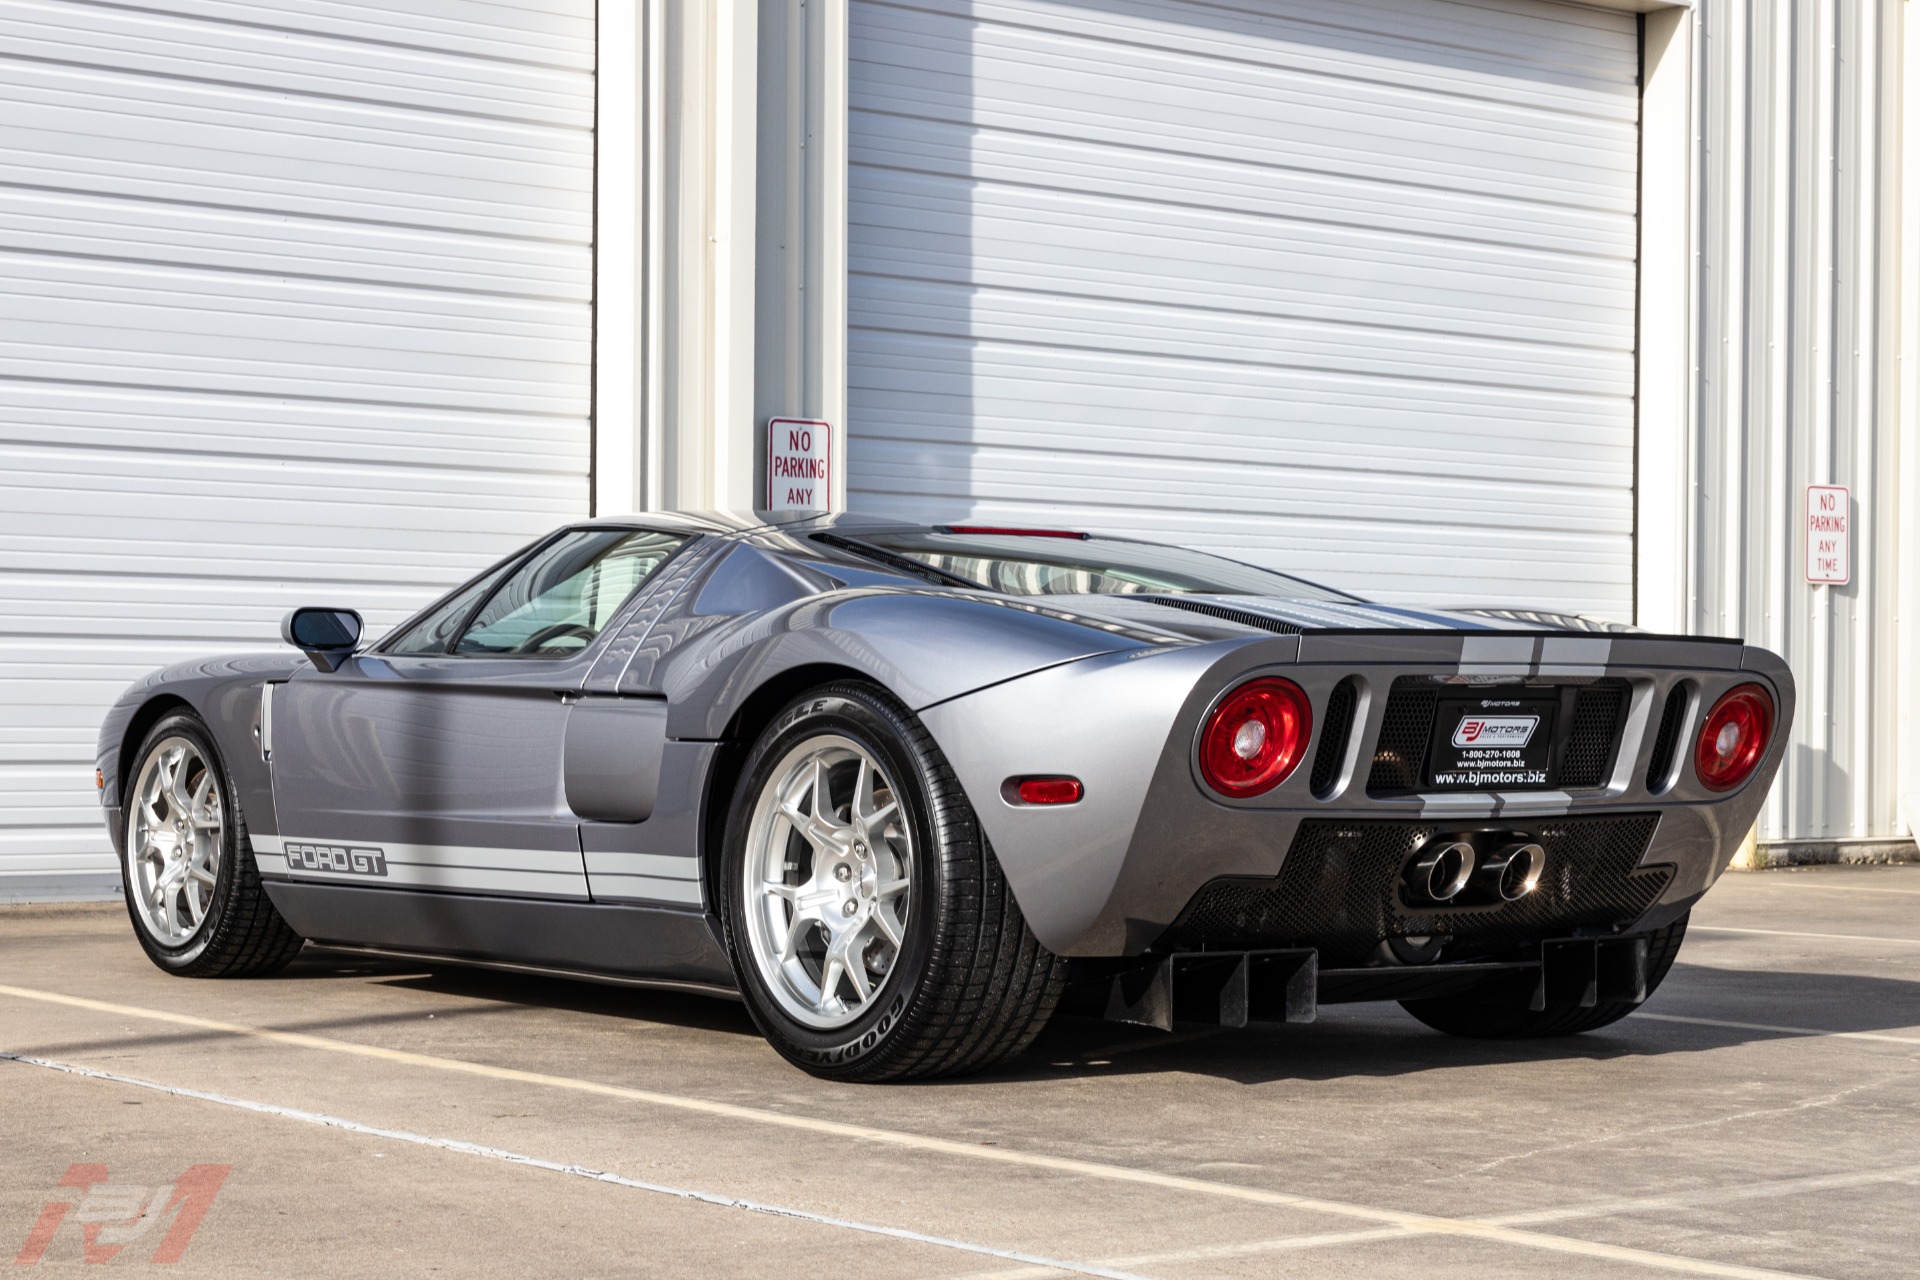 Used-2006-Ford-GT-4-Option-Car-with-5k-miles